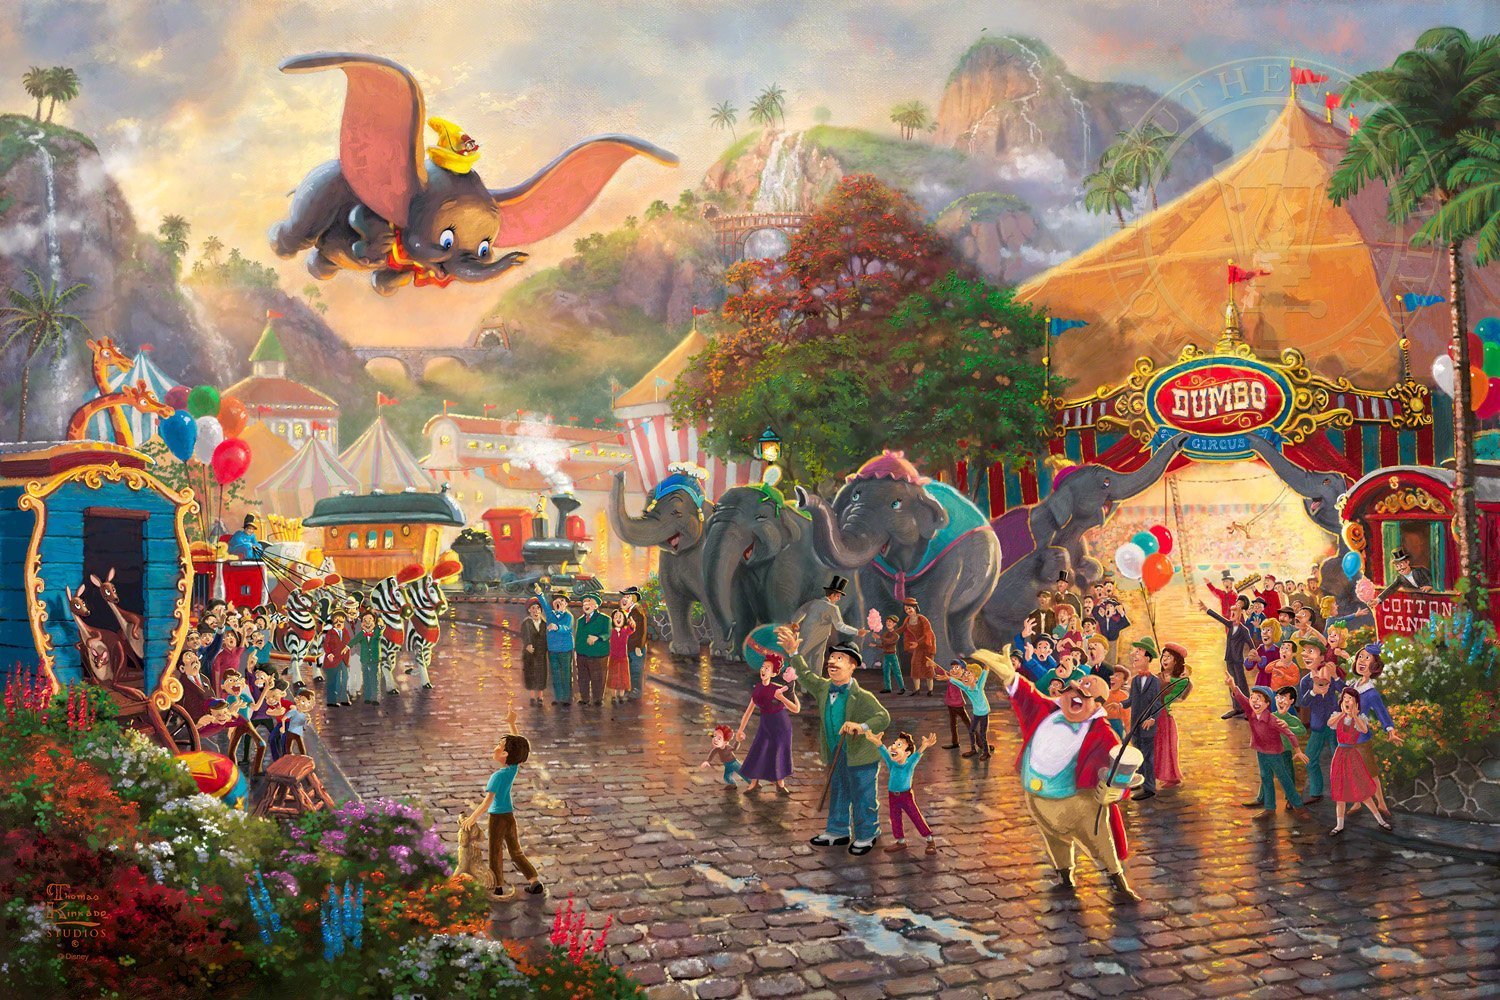  Dumbo feels soaring over the crowd rtrays the happiness and pride that his circus friends feel for Dumbo as he soars above the crowd.- Unframed